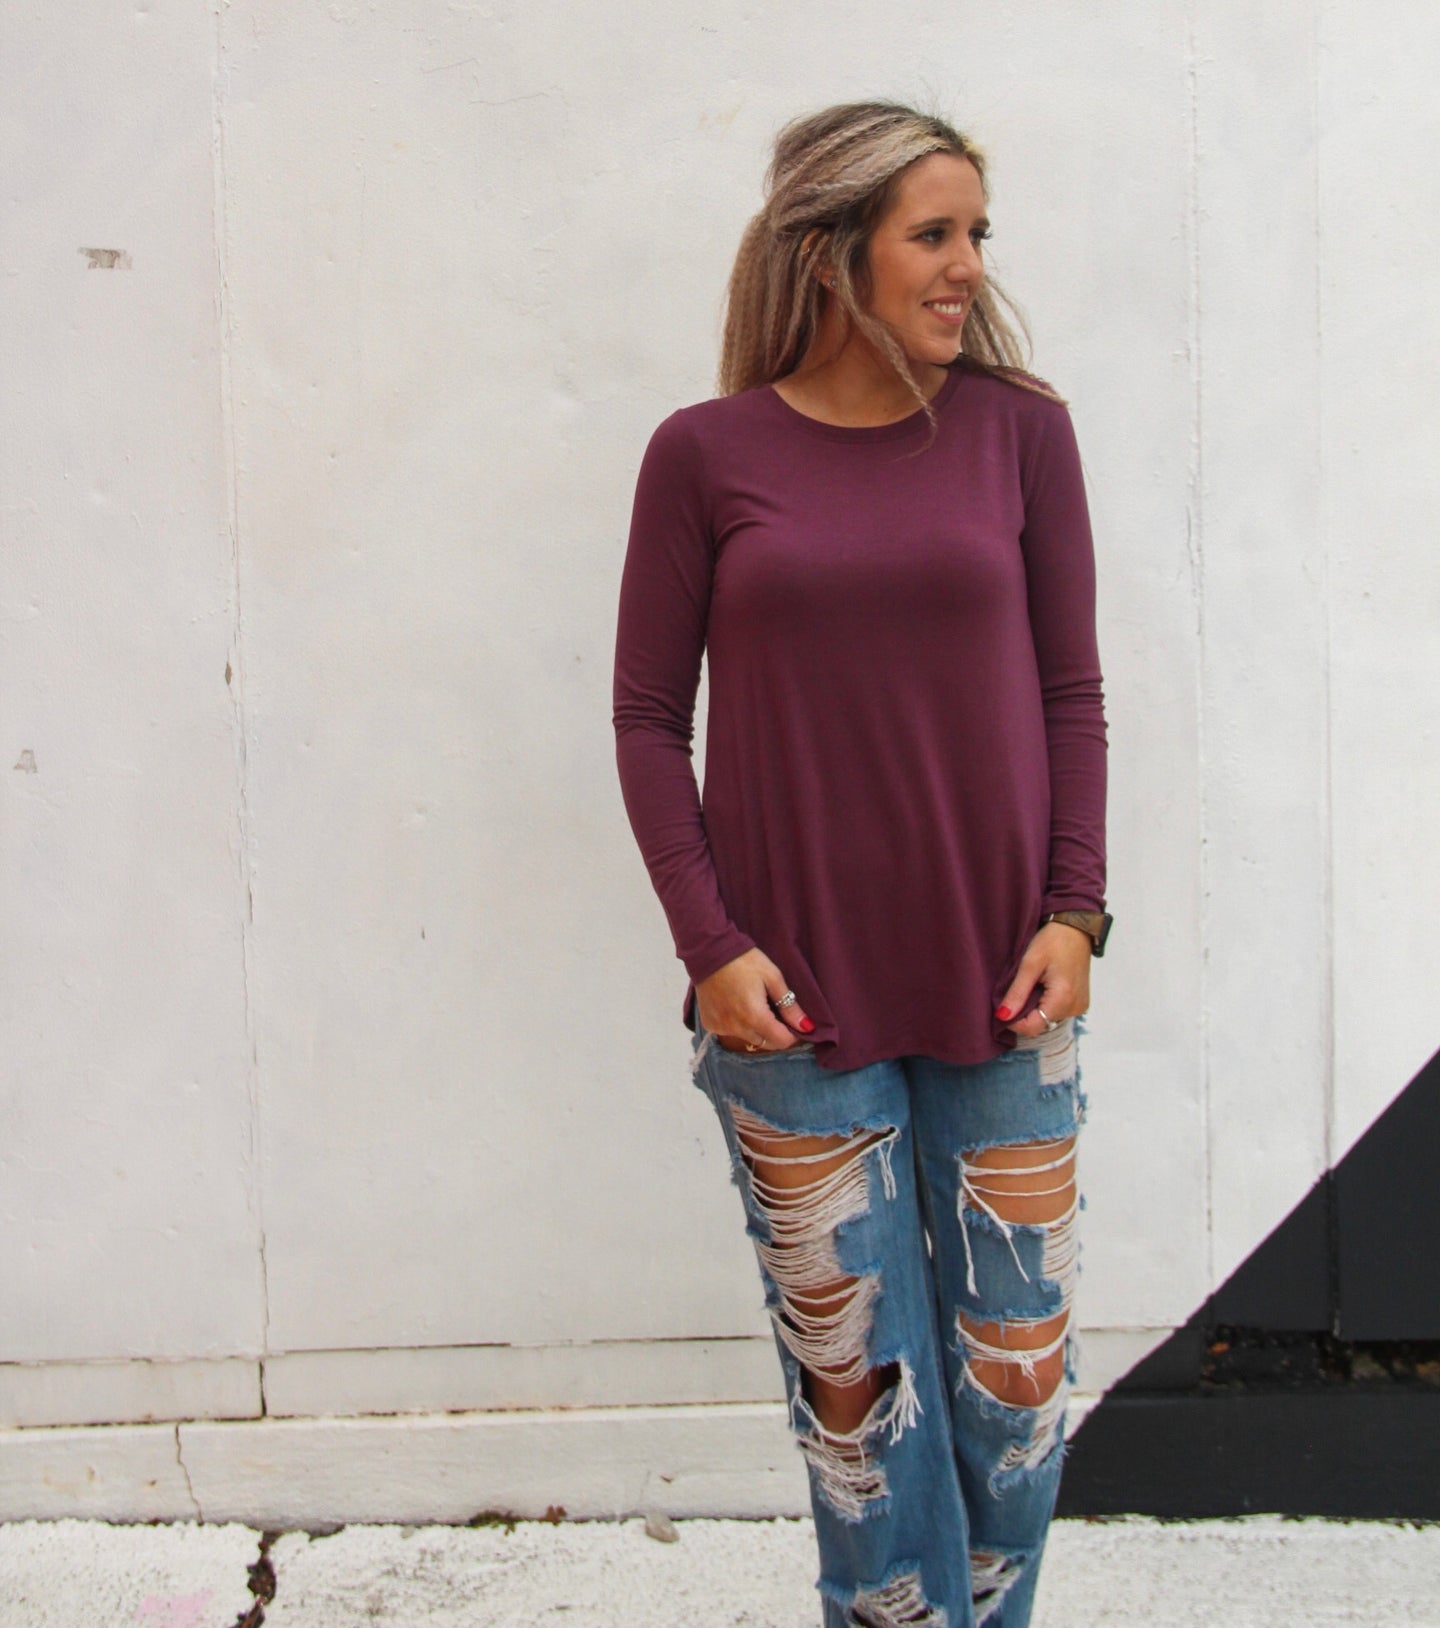 The Lazy Day Long Sleeve Top in Plum